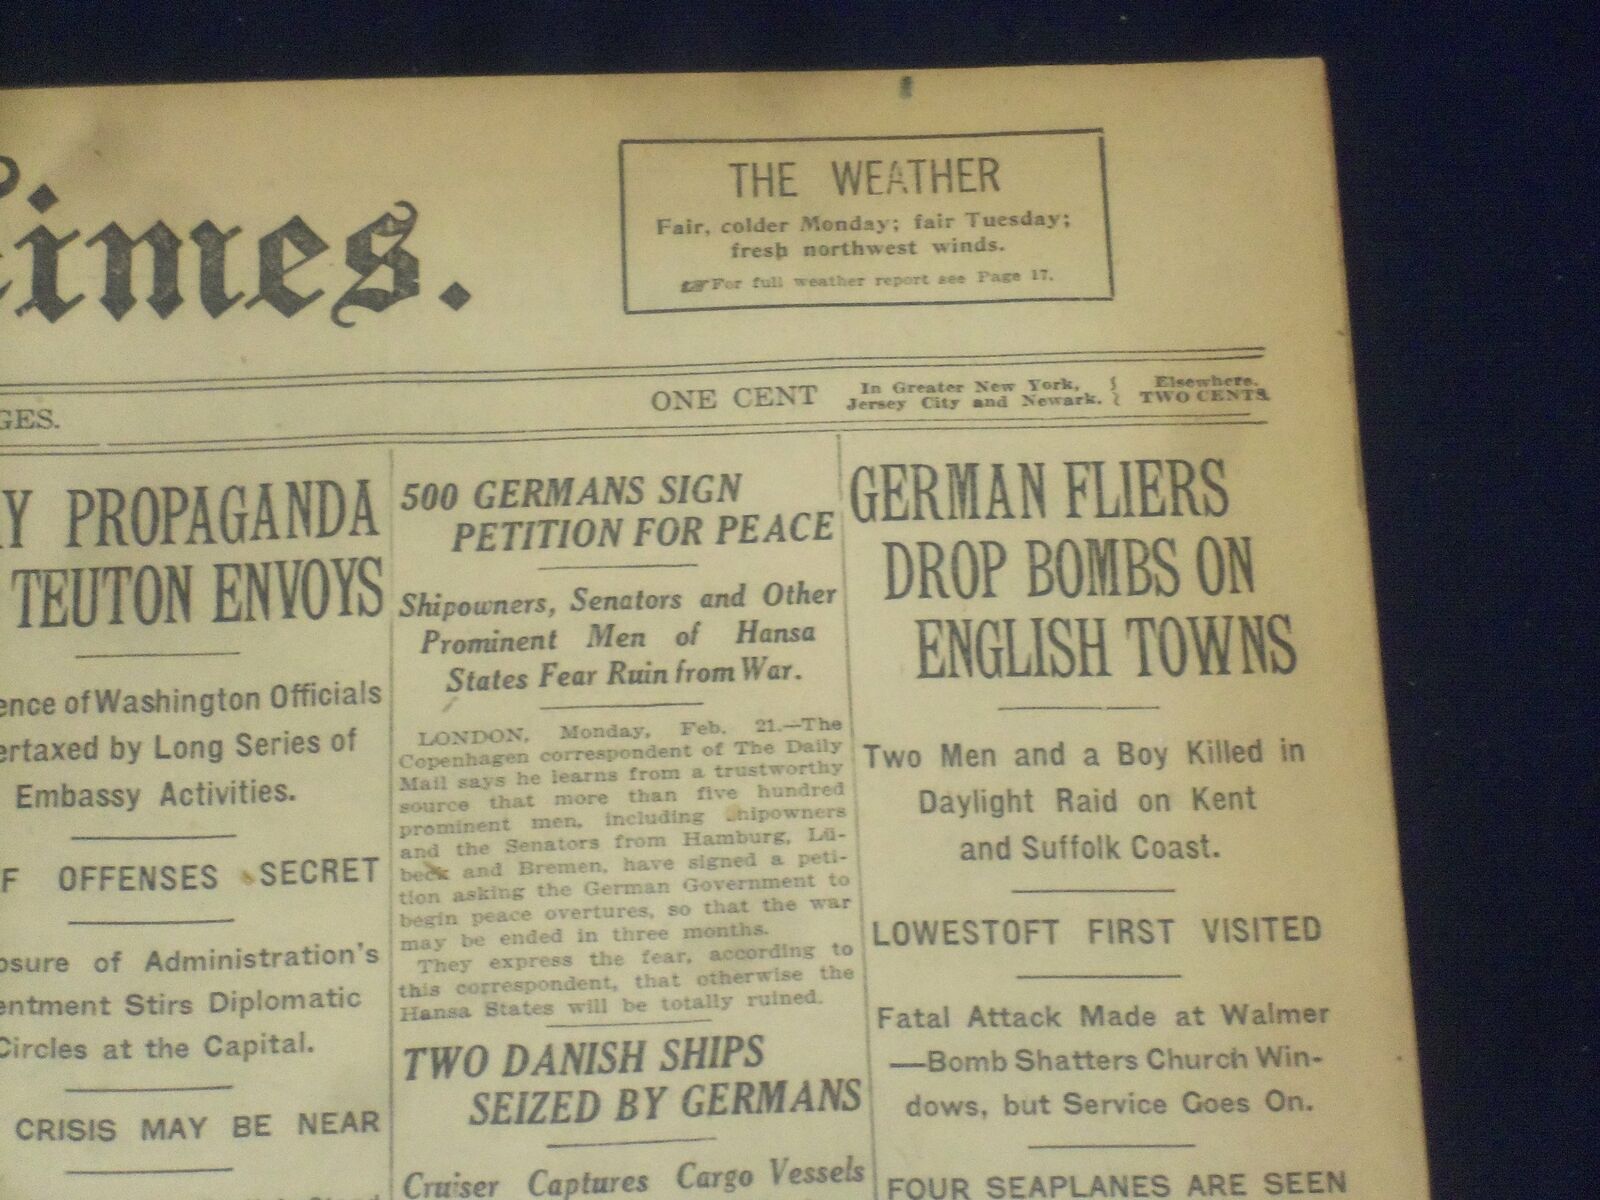 1916 FEB 21 NEW YORK TIMES - GERMAN FLIERS DROP BOMBS ON ENGLISH TOWNS - NT 9045